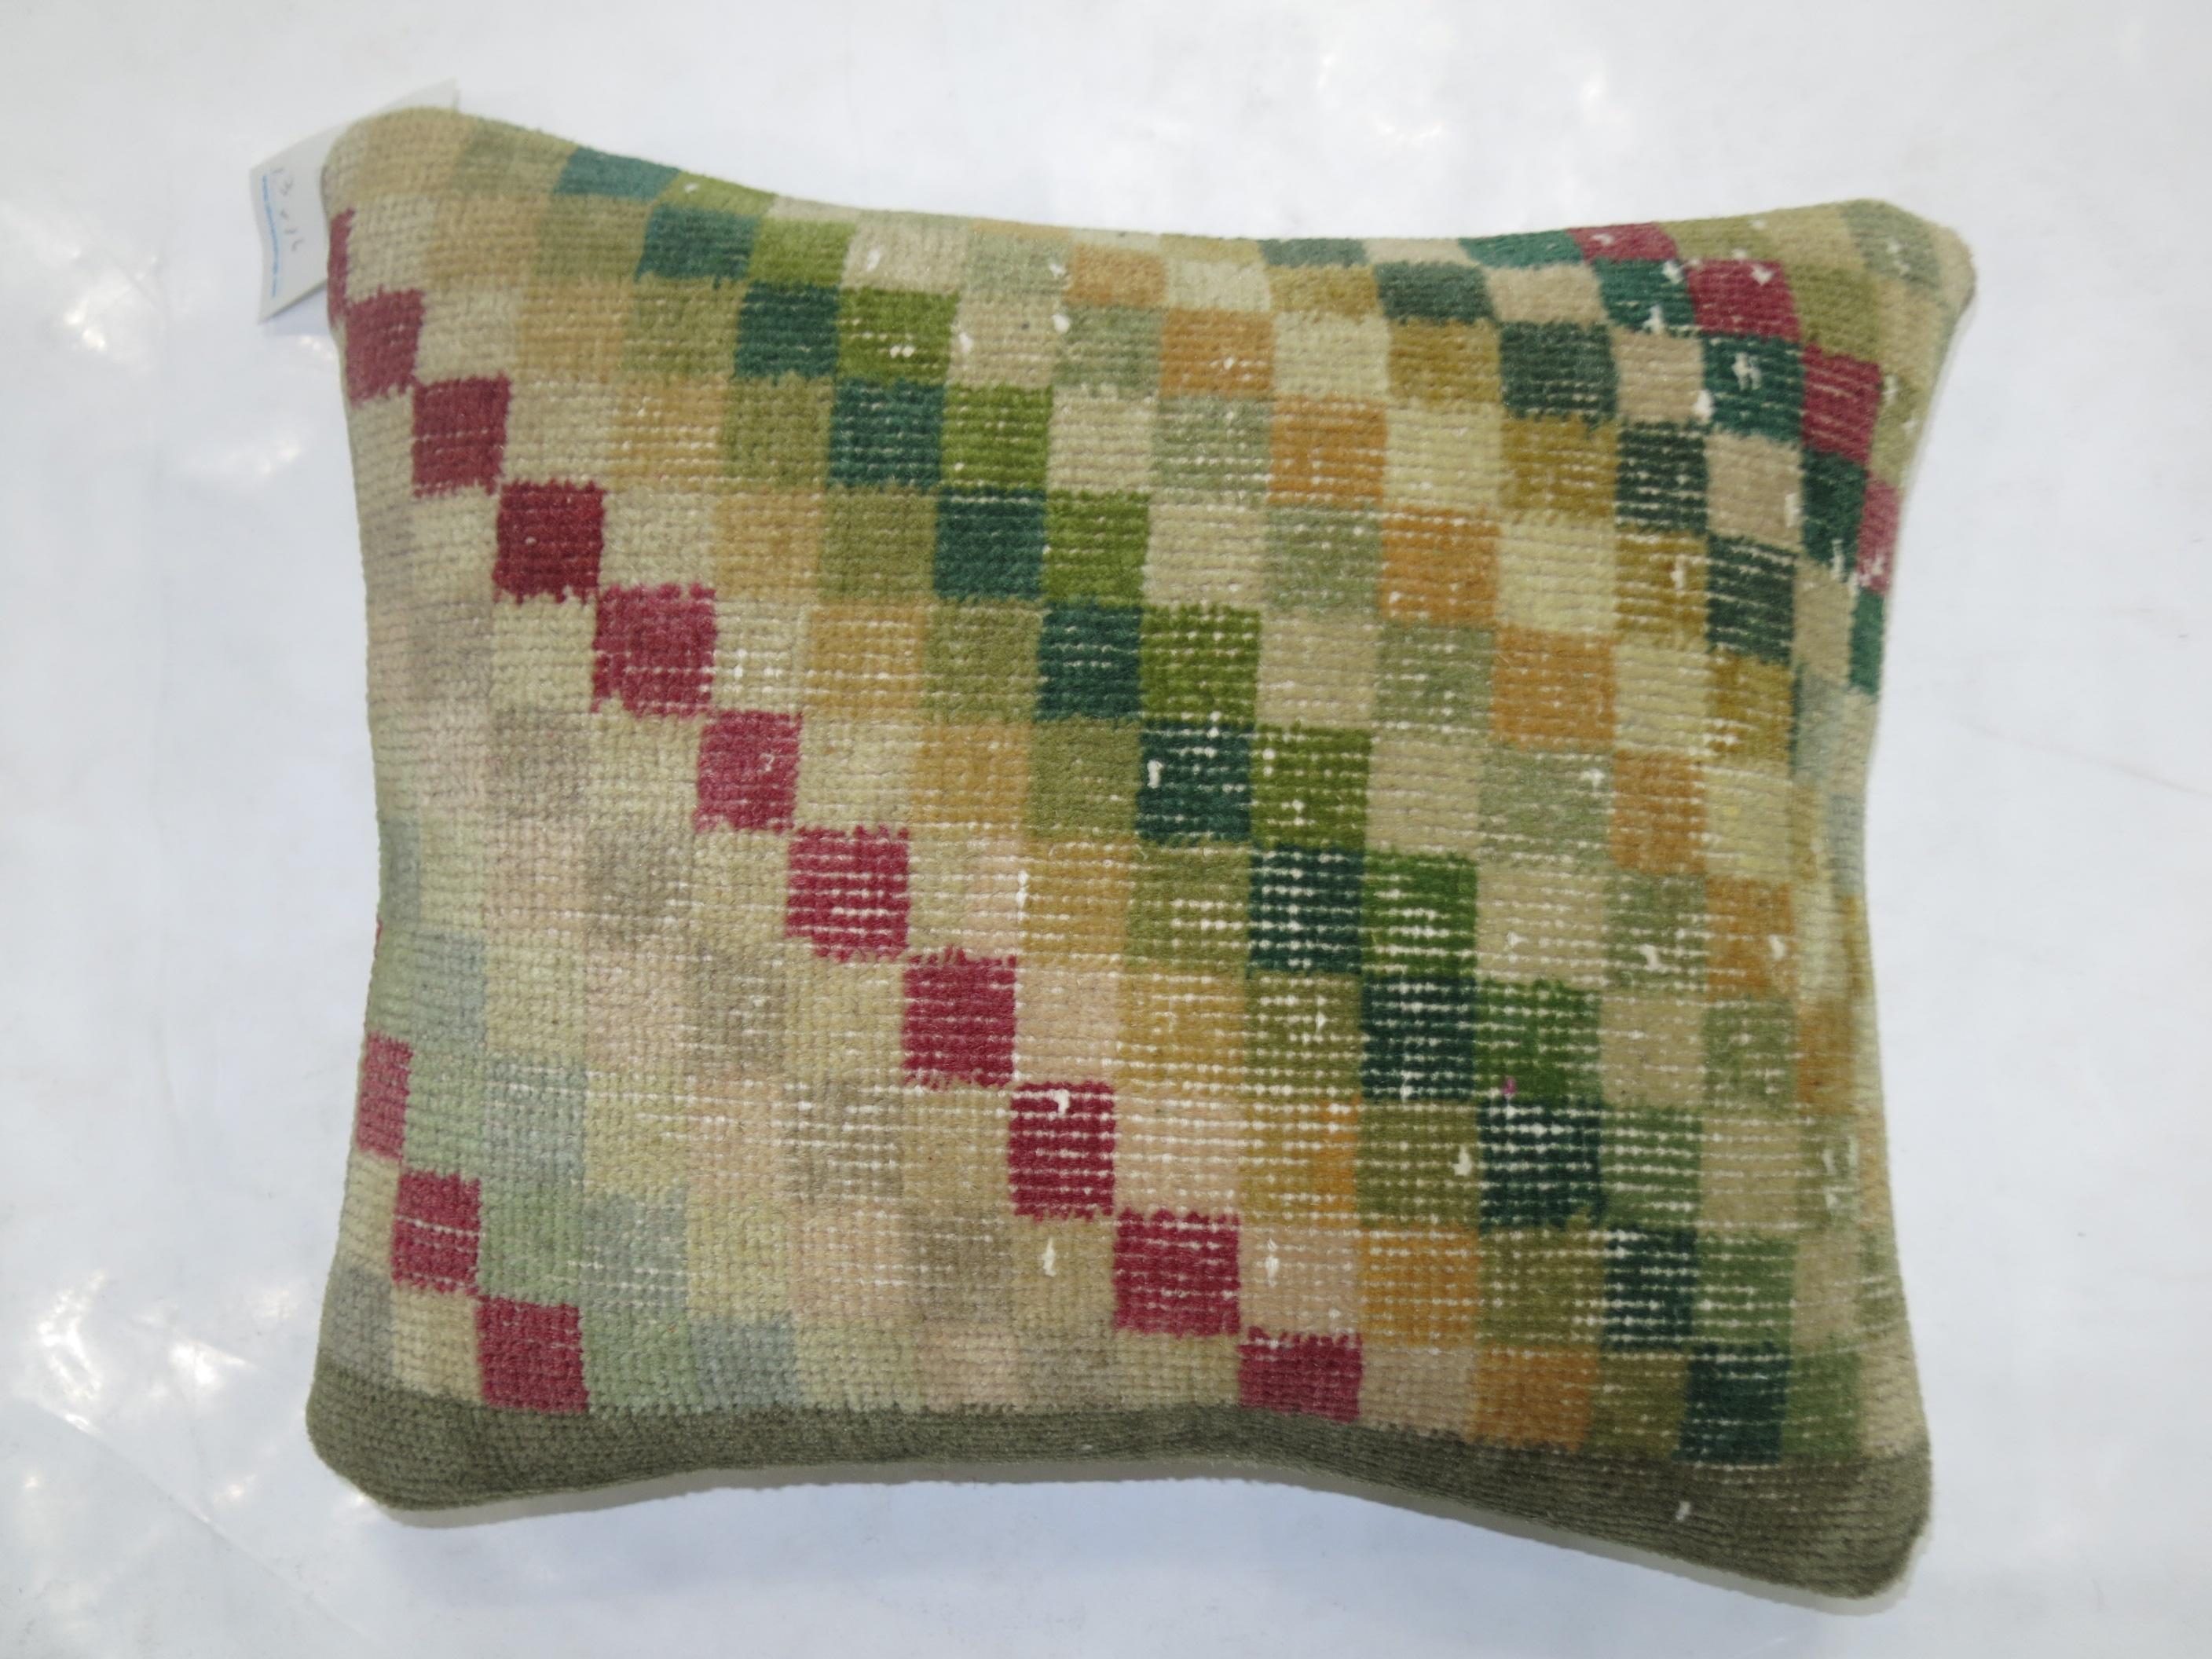 Pillow made from a Turkish Deco rug with a checkerboard motif

Measures: 15'' x 18''.